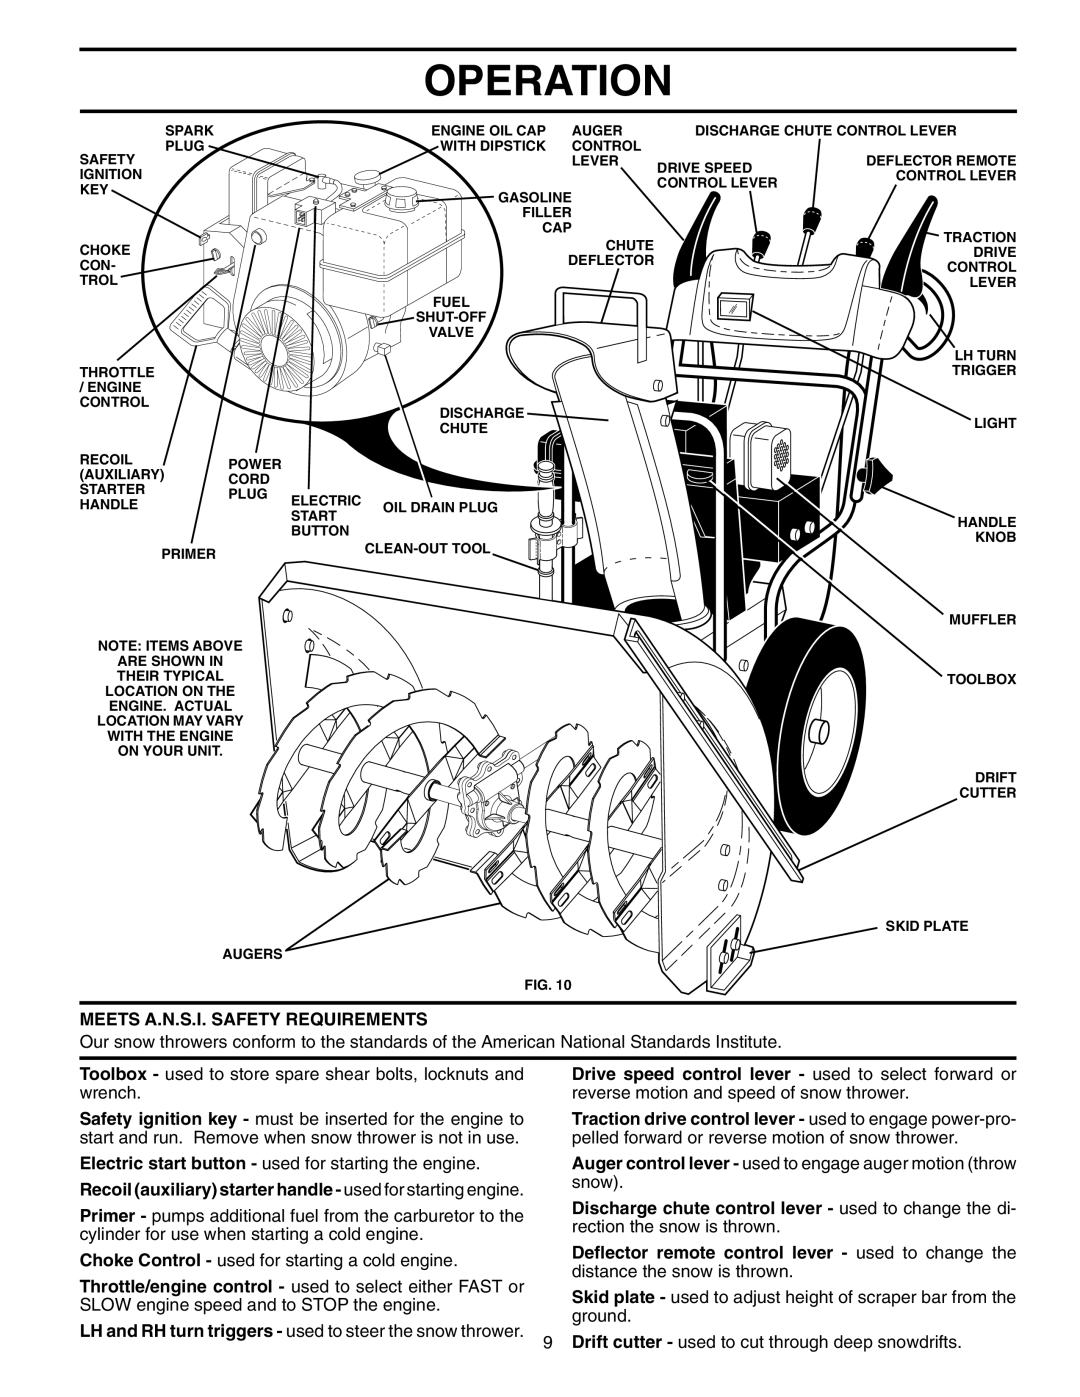 Husqvarna 1130SBE-OV owner manual Operation, Meets A.N.S.I. Safety Requirements 